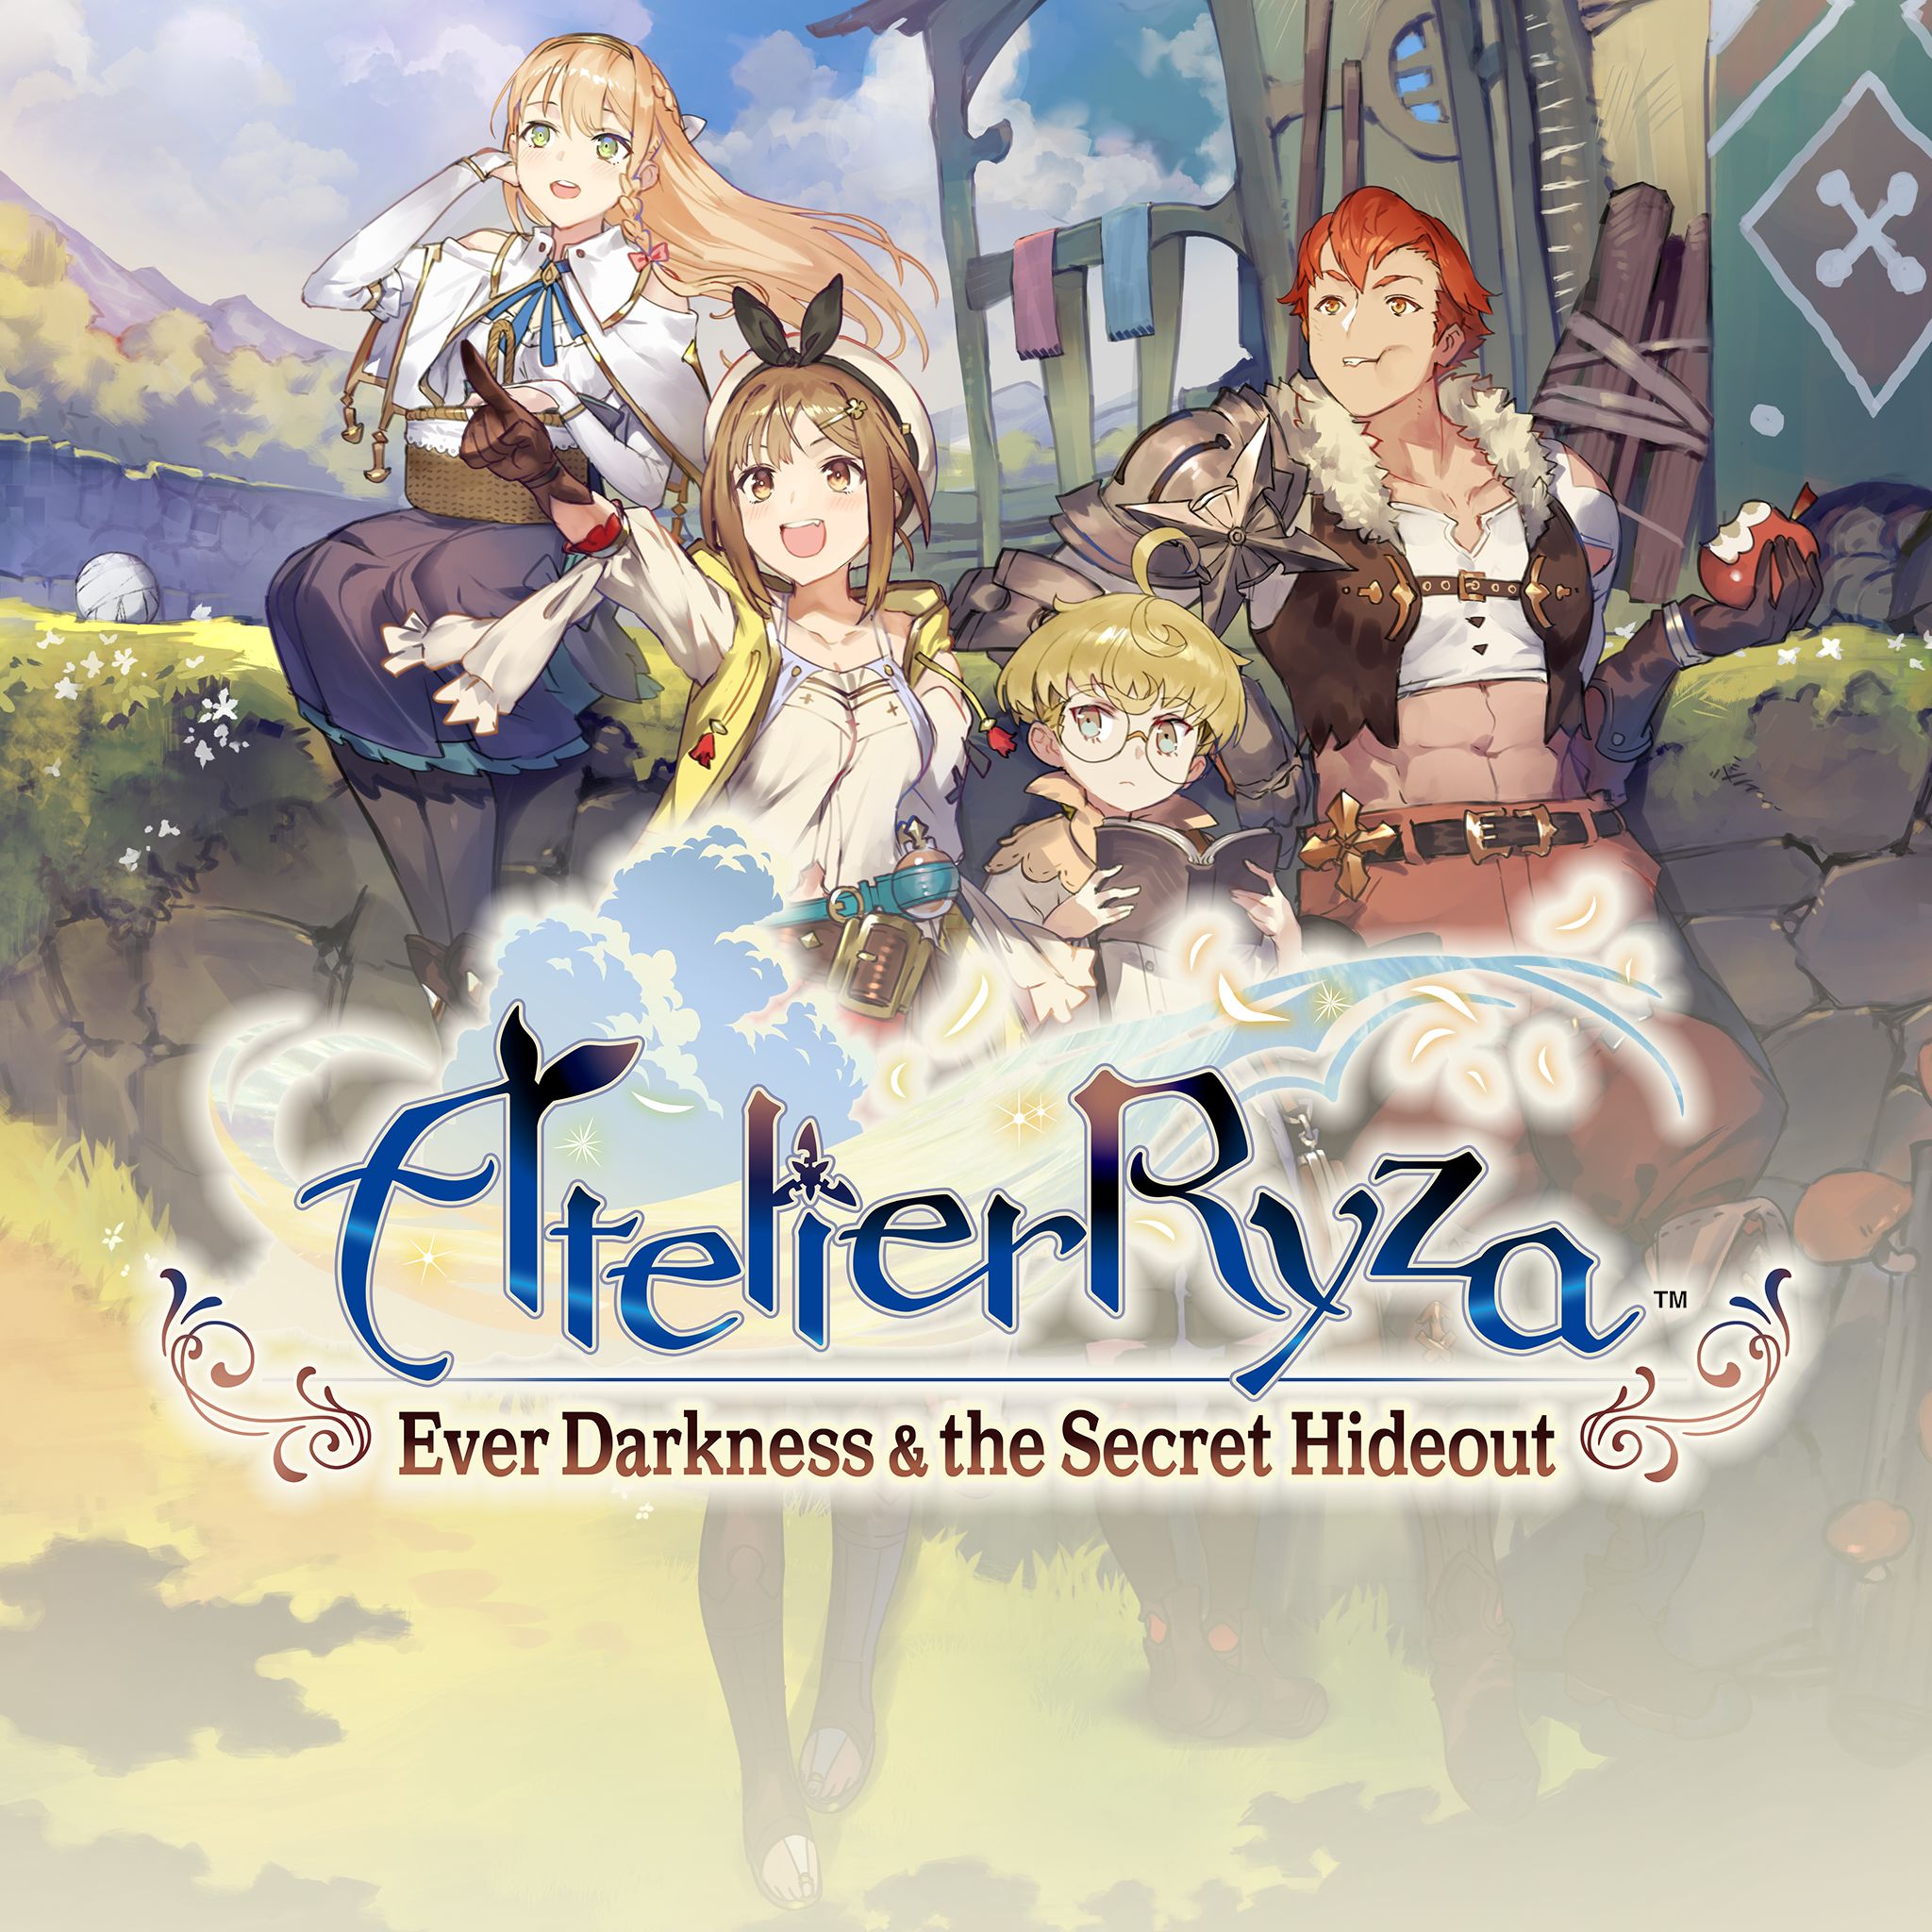 atelier ryza: ever darkness and the secret hideout 的图片